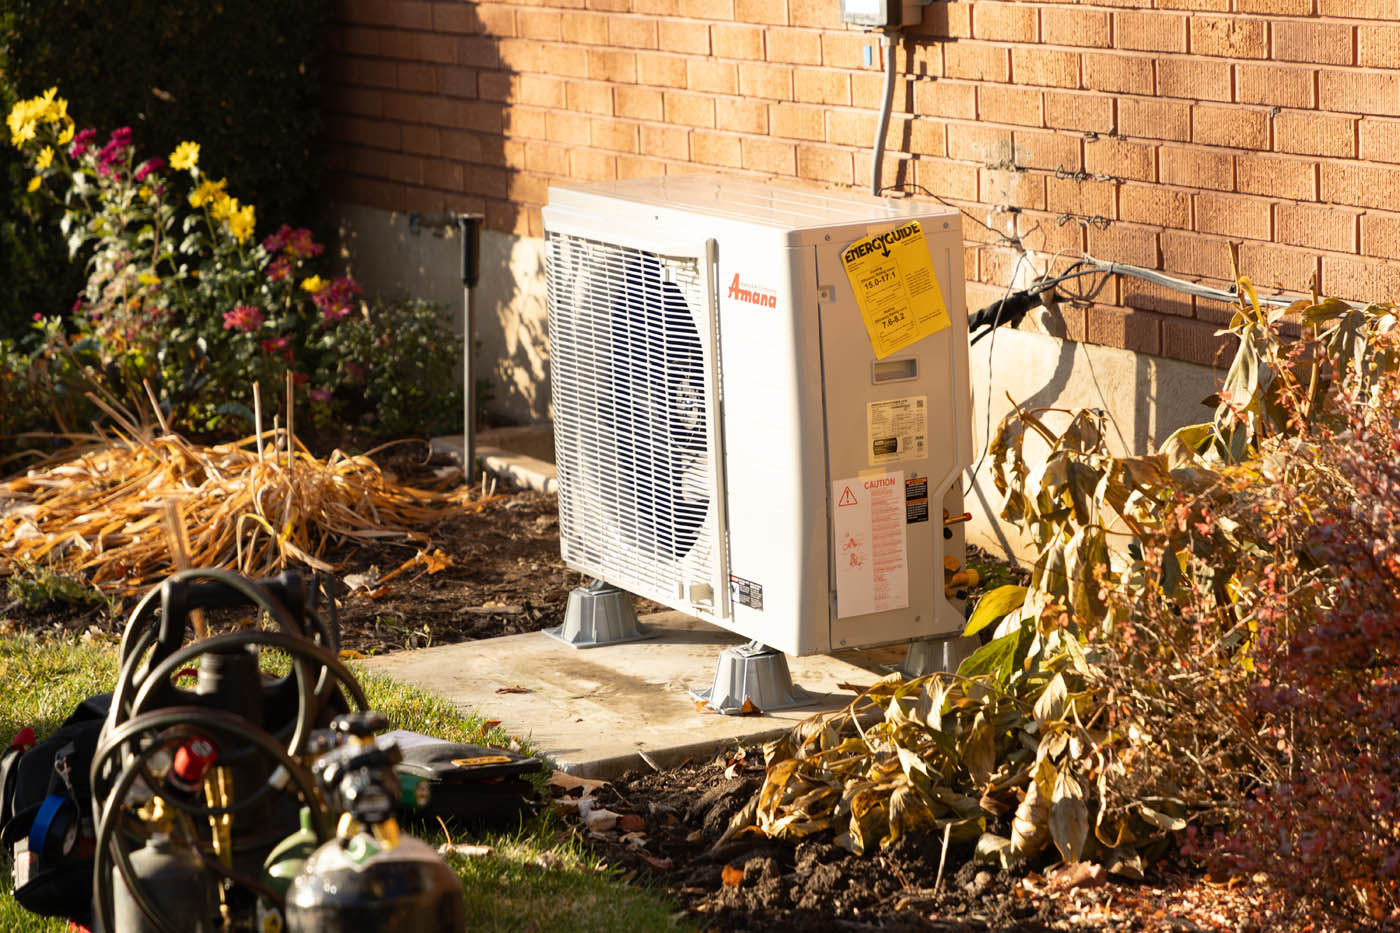 
		A professionally installed hvac system - get your routine hvac maintenance with Absolute Comfort.
	